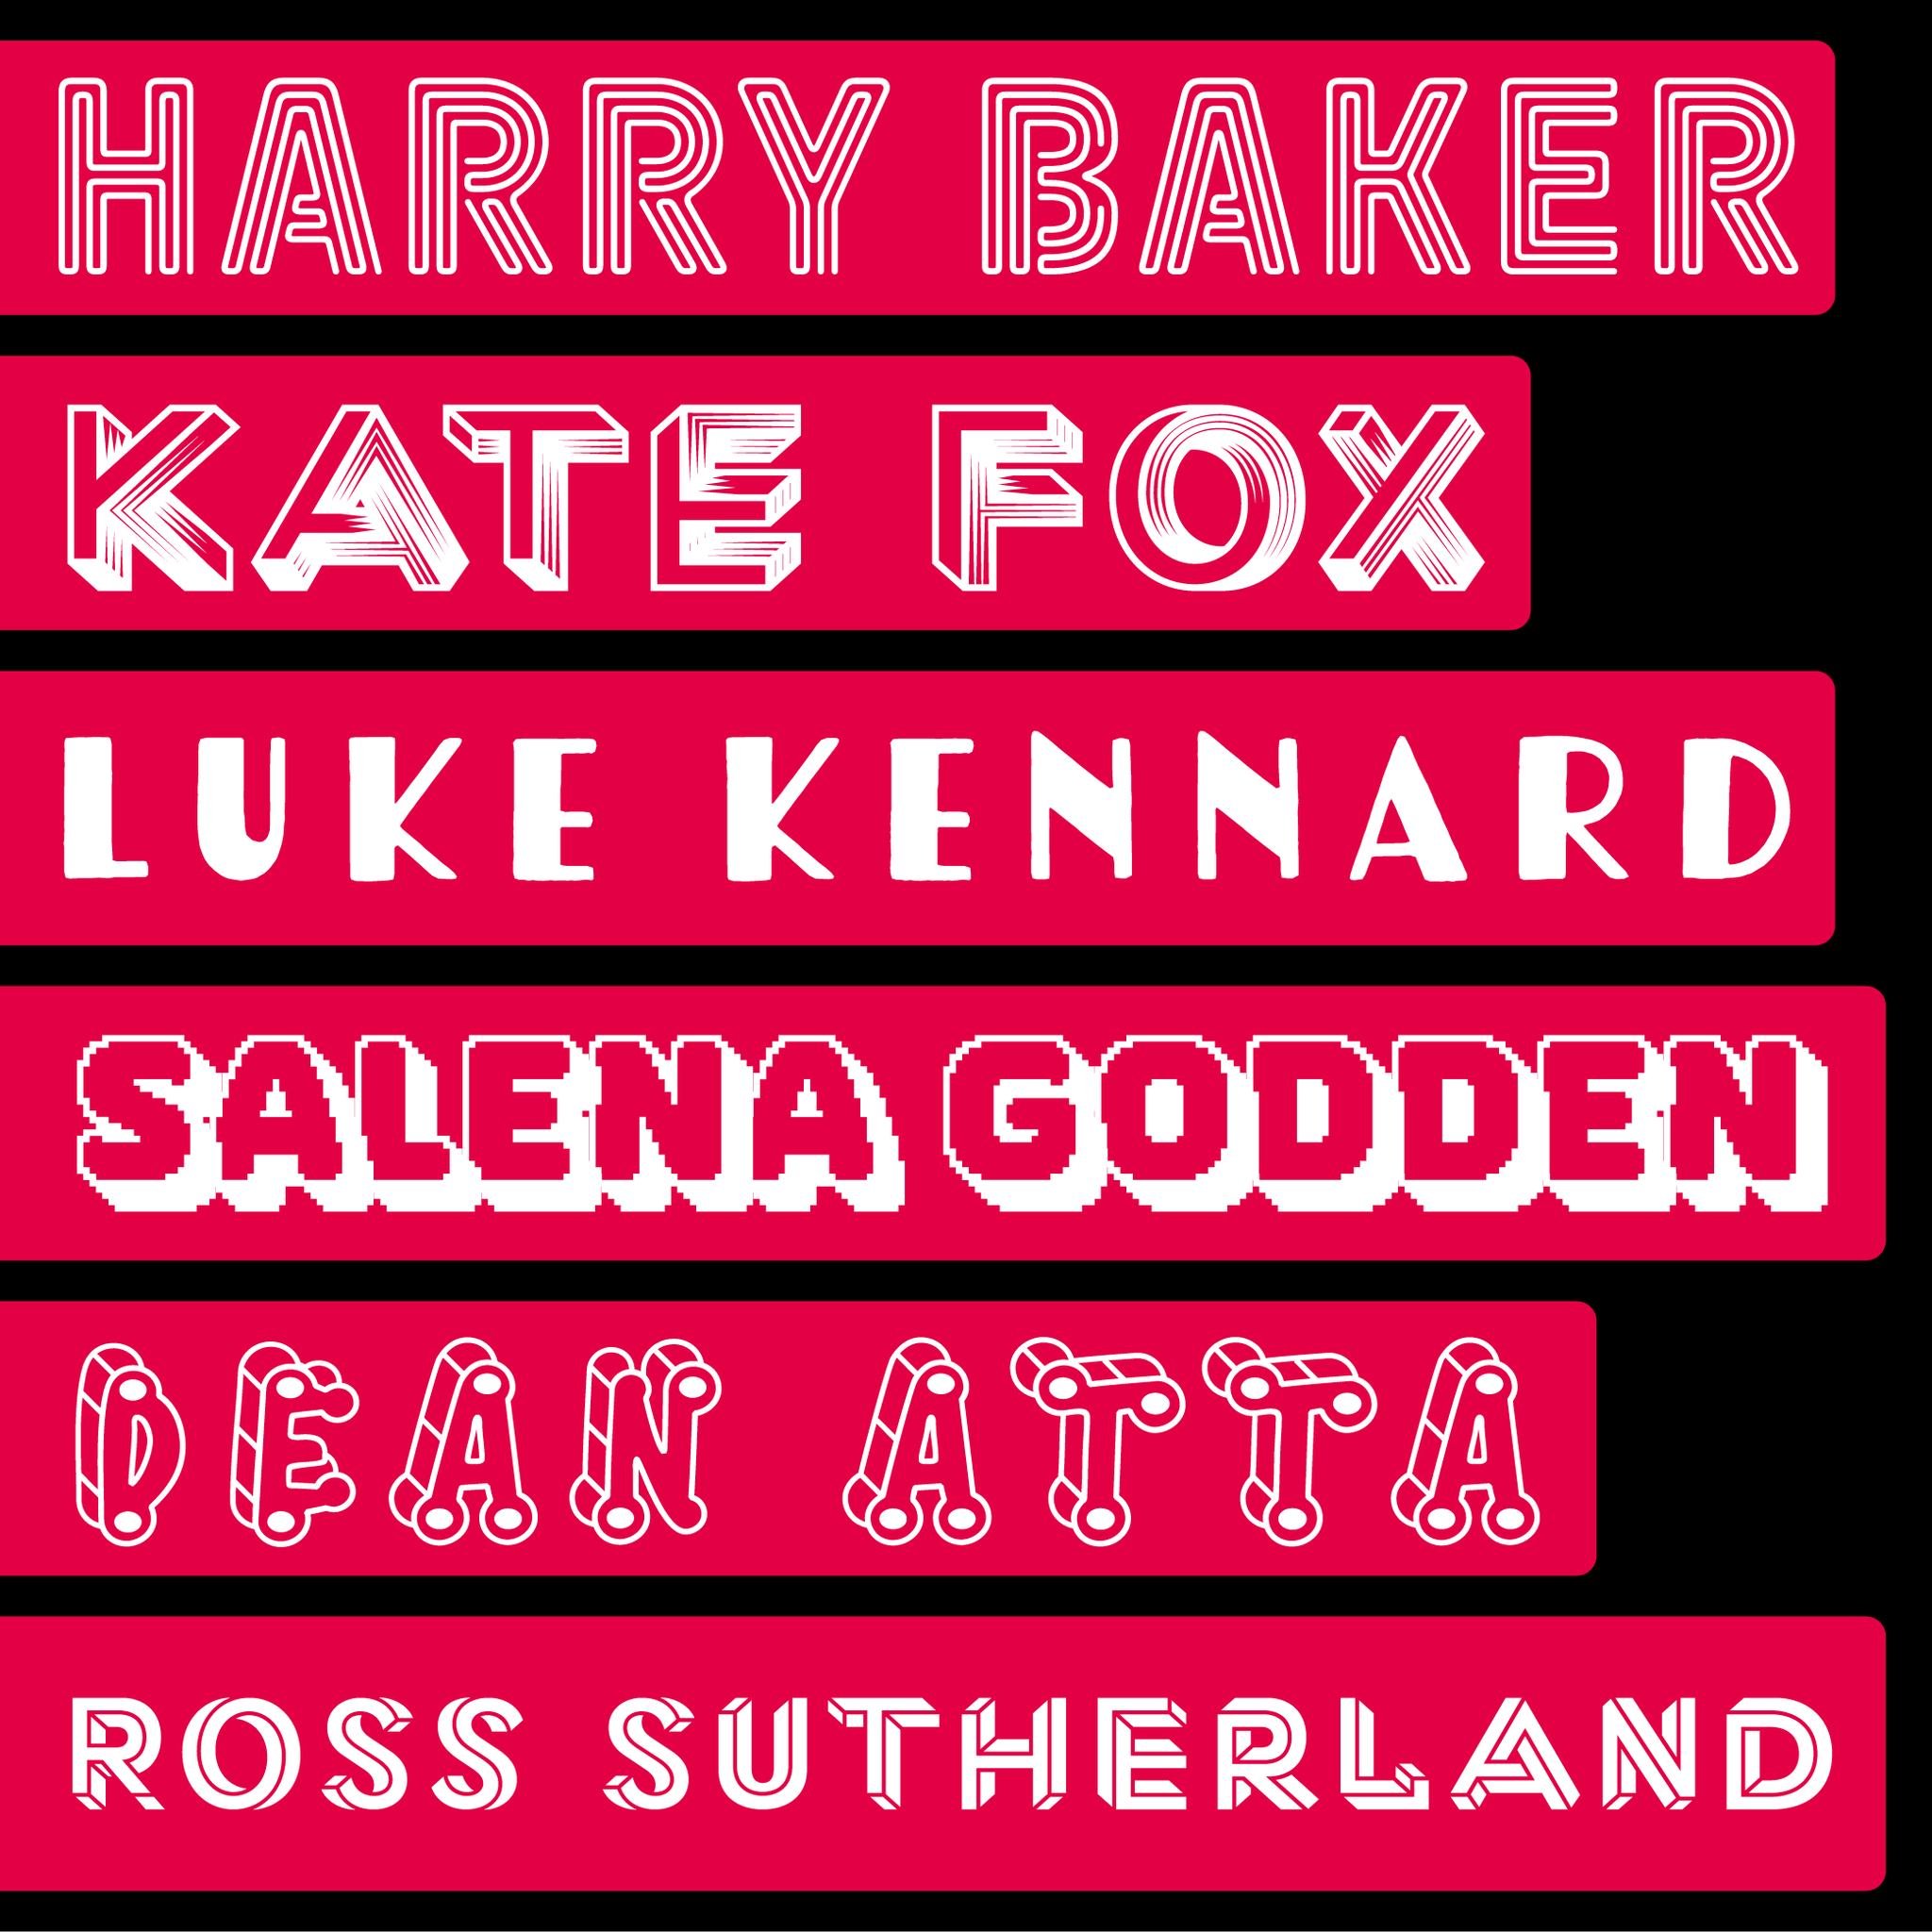 6 Reasons to Hit the Speakeasy this Festival, this May (next month)

💛 @harrybakerpoet 21st May, 4:30pm
💚 @deanatta 21st May, 6:30pm
🩵 @katefoxwriter 22nd May, 4:30pm
🩷 @luukekennnard 22nd May, 6:30pm
💜 @salena.godden 23rd May, 4:30pm
🧡 @rossgs